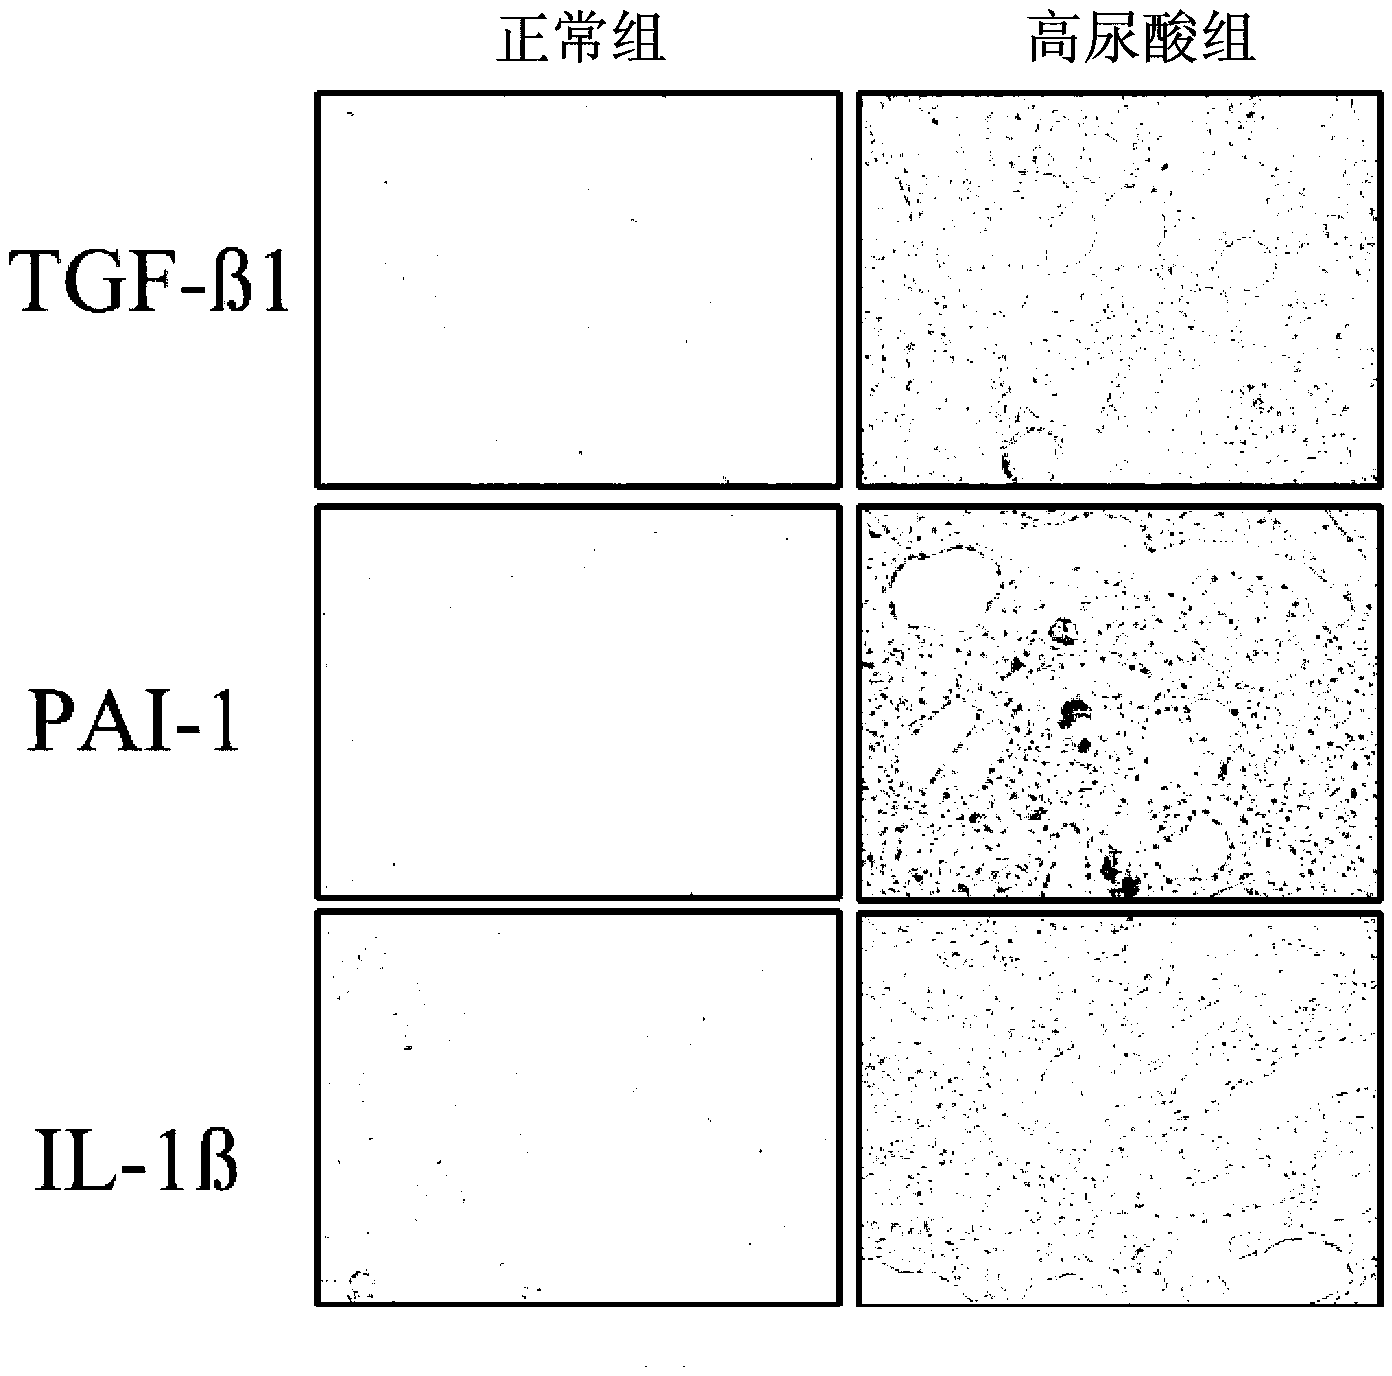 Method for constructing animal model of hyperuricemia induced renal interstitial fibrosis